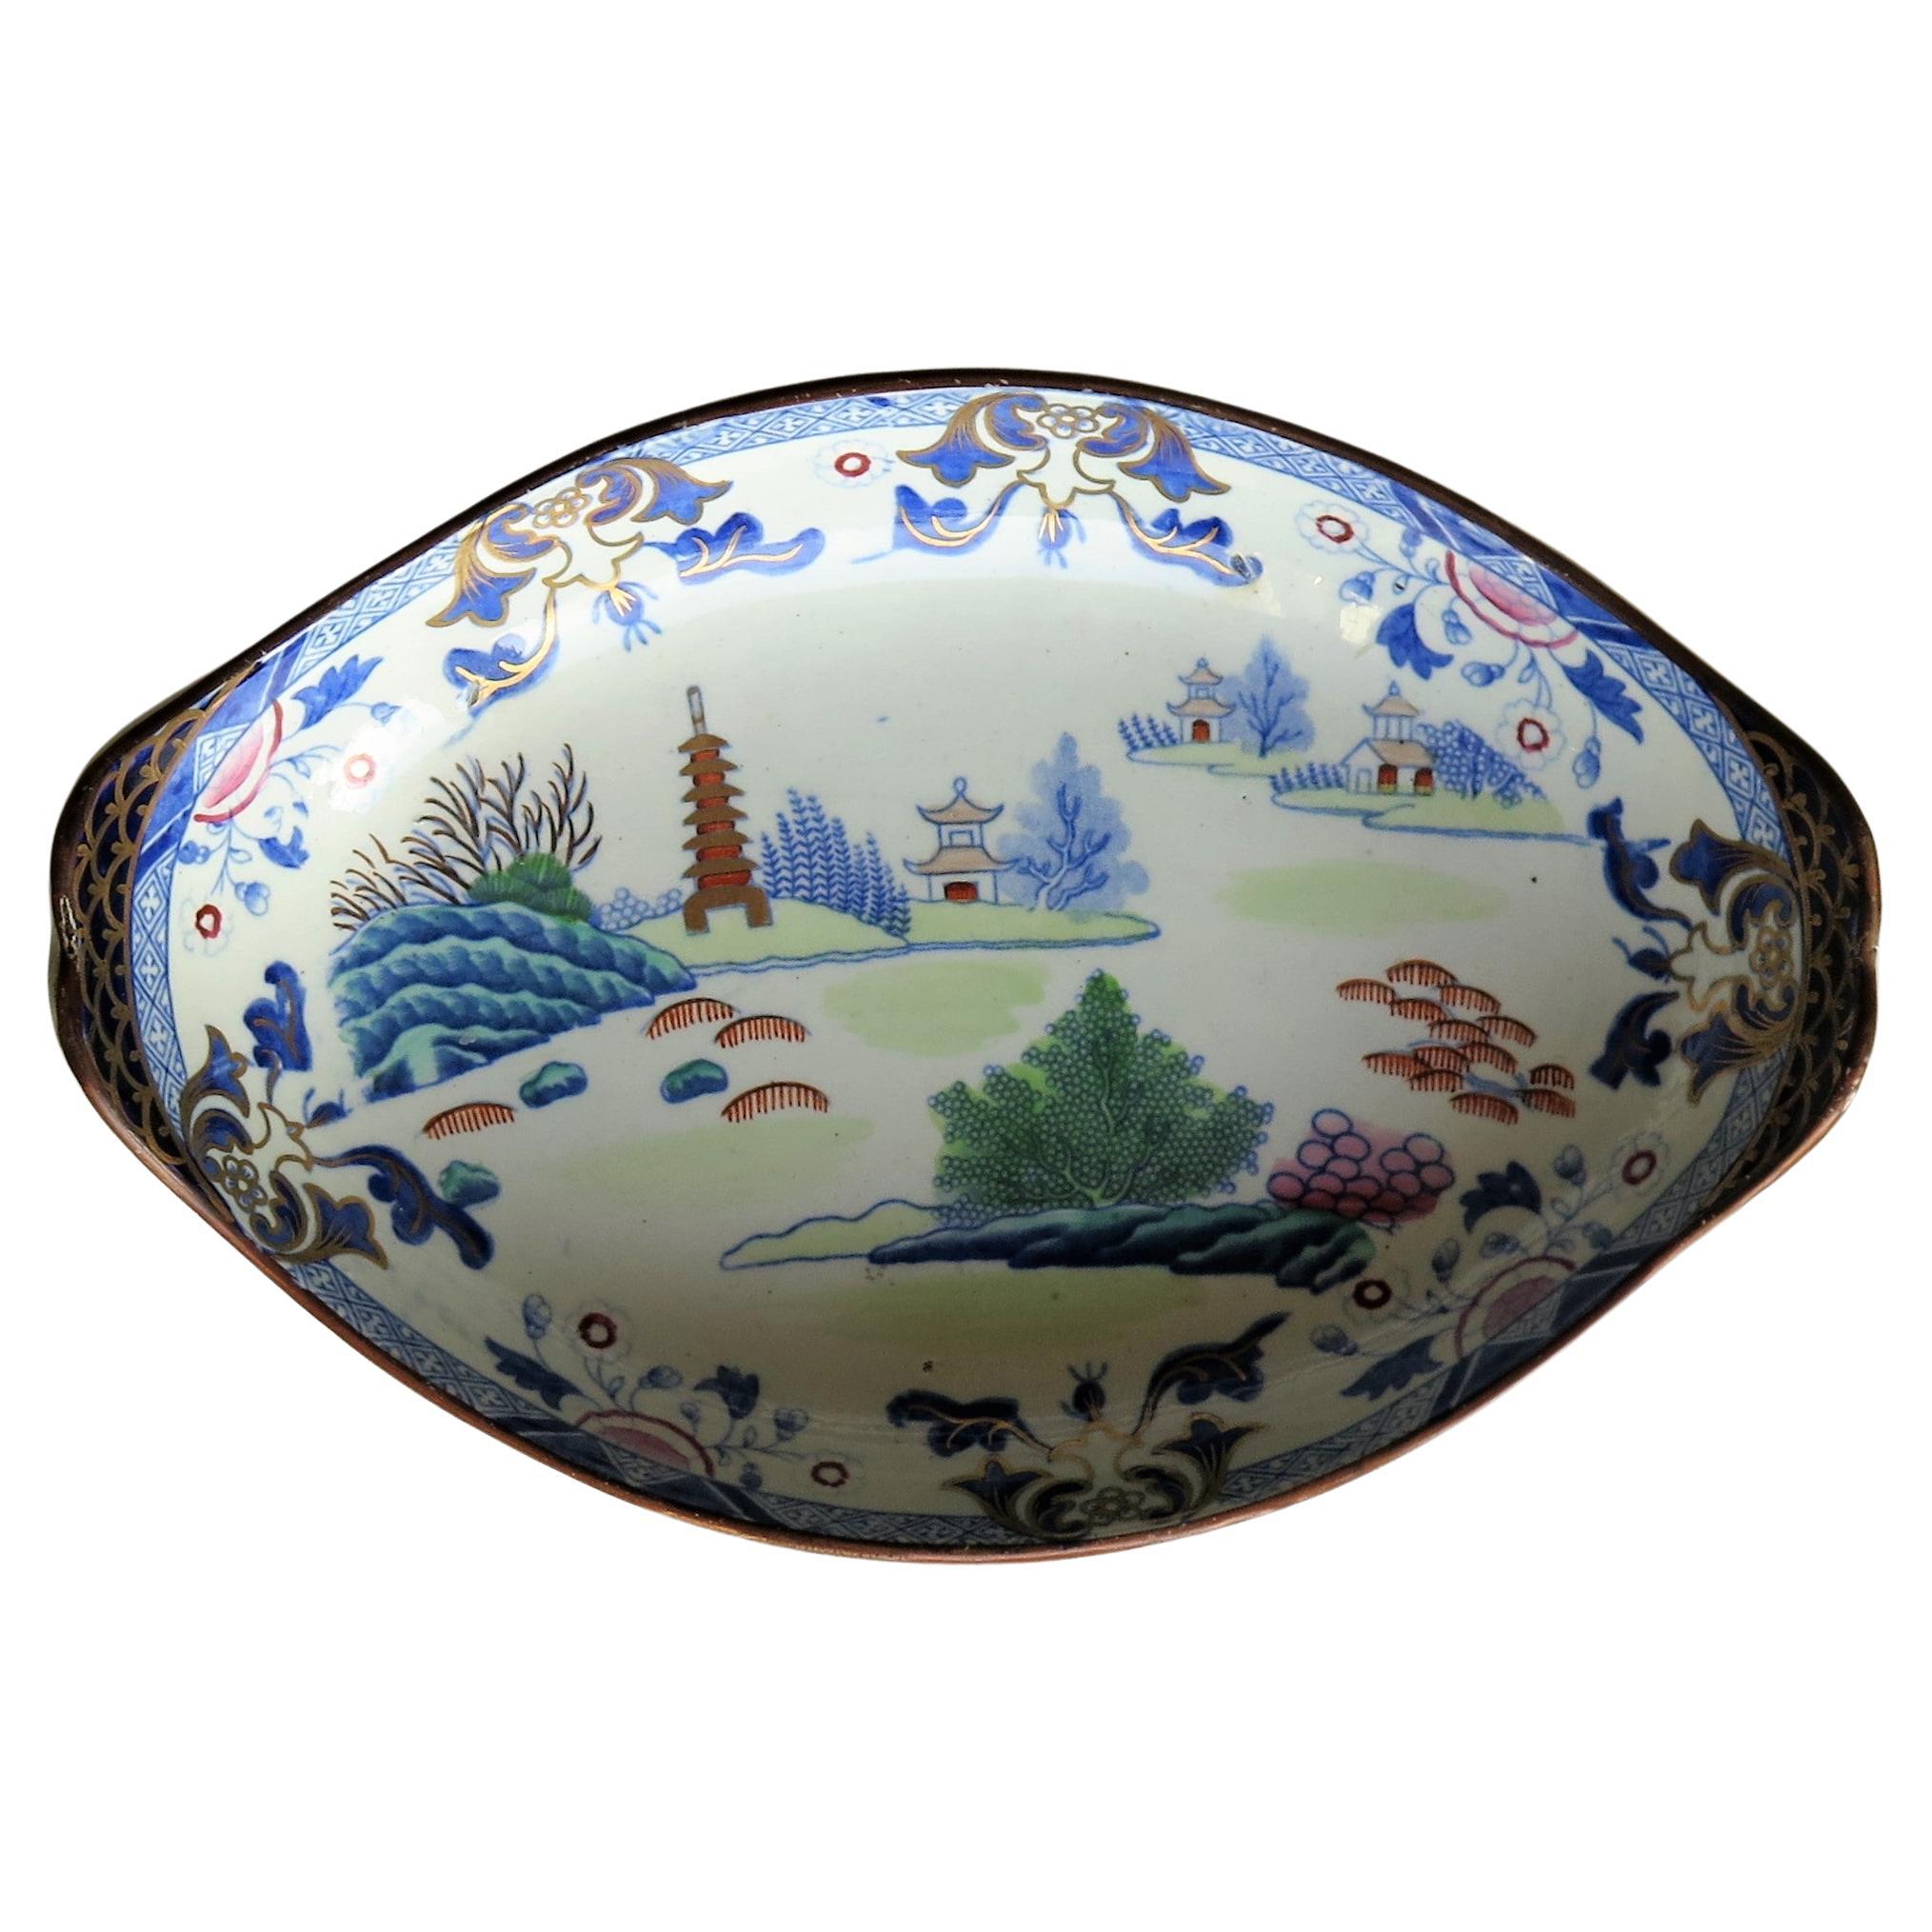 Georgian Ironstone Dish by Hicks & Meigh in Chinese Landscape Pattern circa 1818